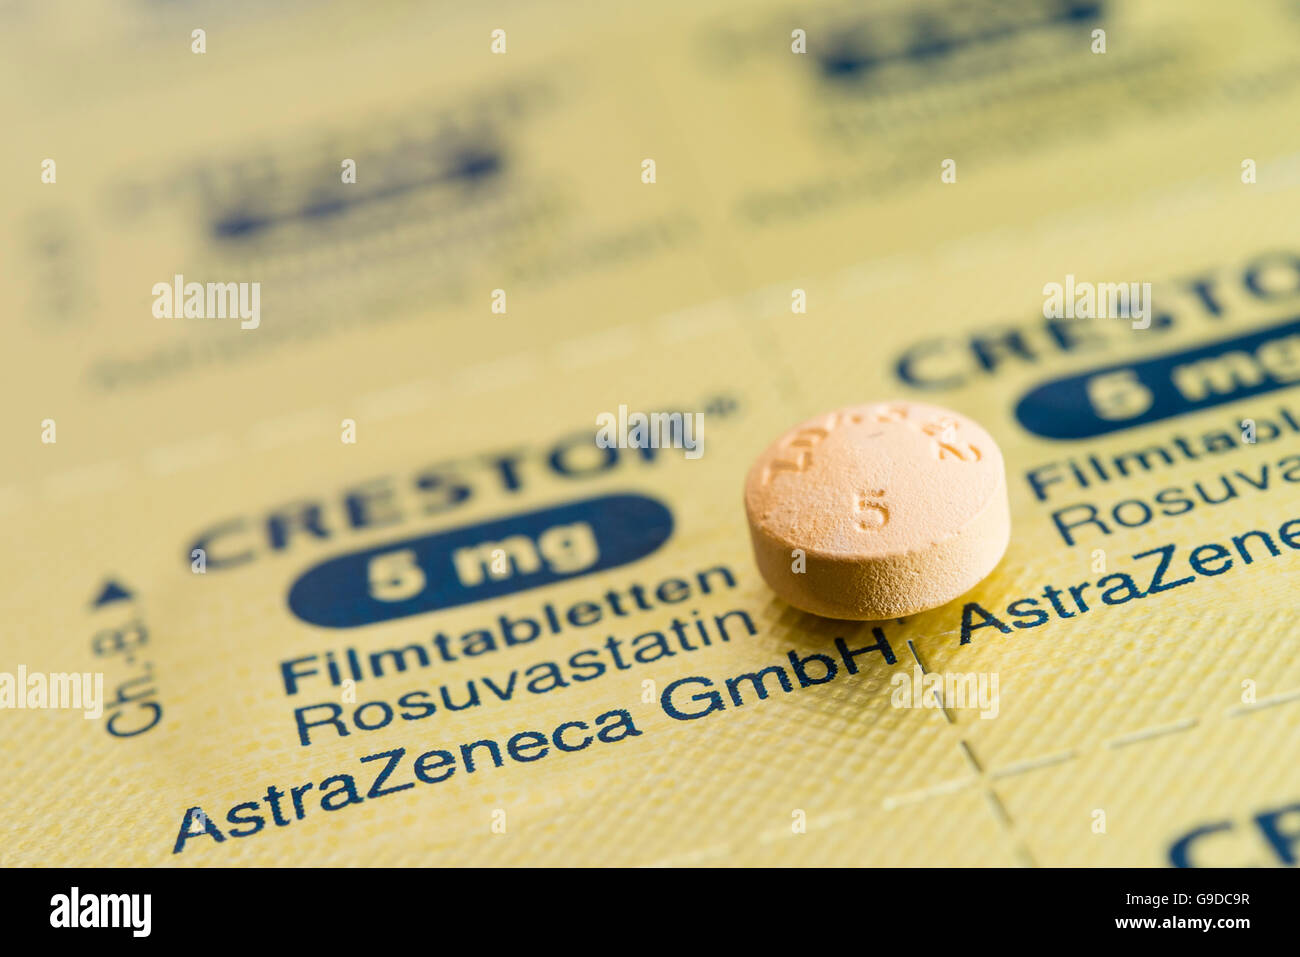 Tablet and foil blister packet for Crestor branded statins cholesterol reducing pills. Stock Photo